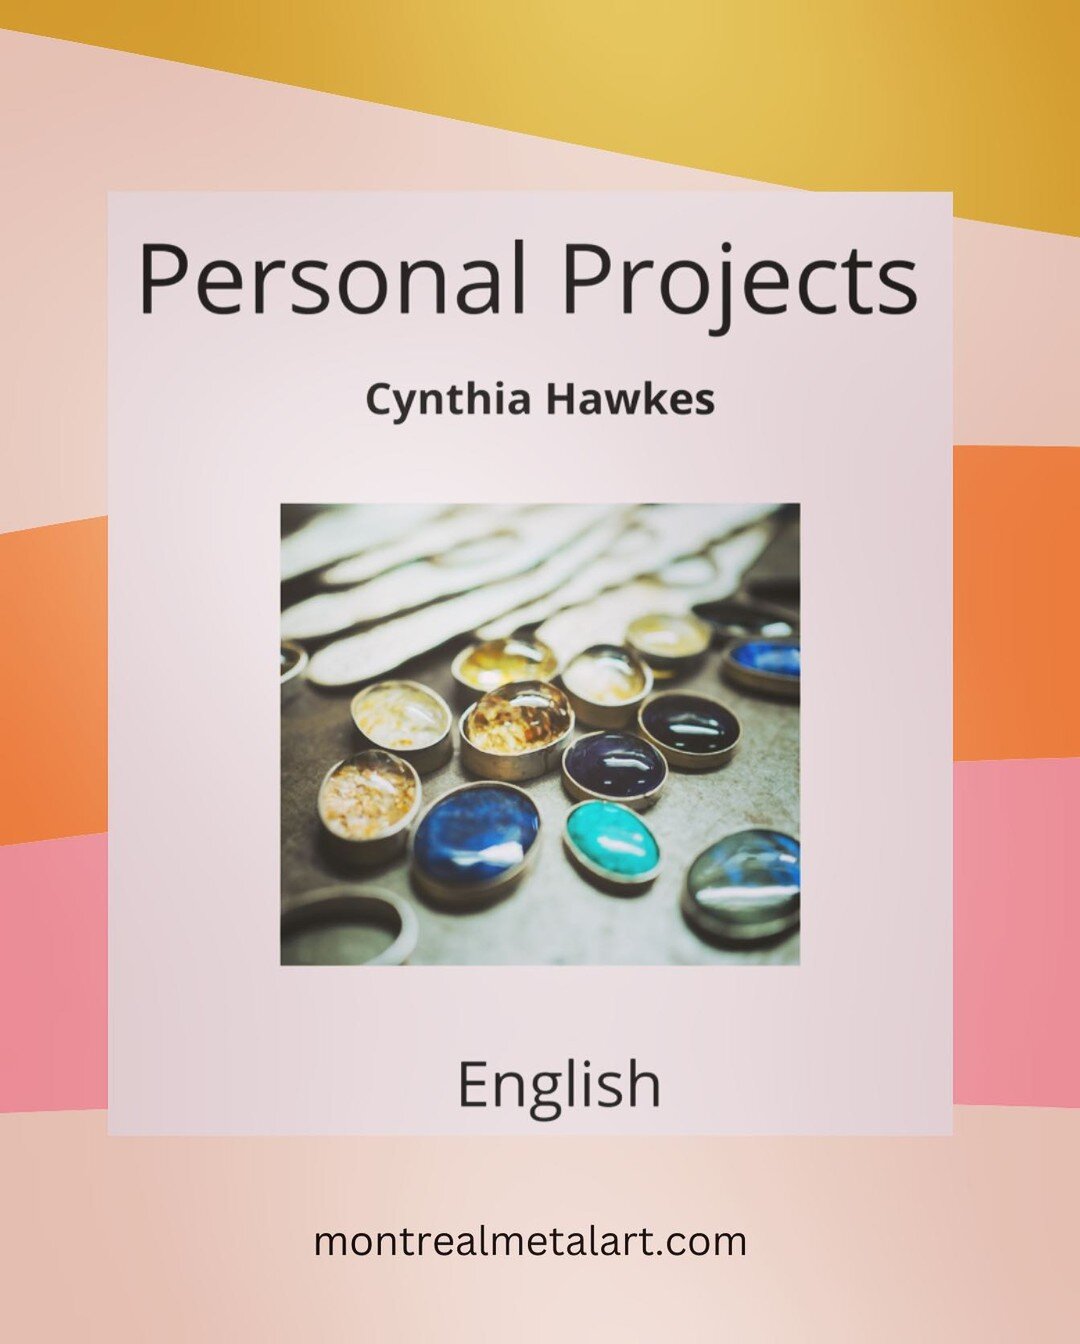 📣 New class alert!

We&rsquo;re pleased to offer a new course for beginner to intermediate jewellers. 

Work on your personal projects with the help of our wonderful instructor @cynabijoux!

➡️ Dates: Tuesday evenings, May 16 - June 20

➡️ Time: 6:3